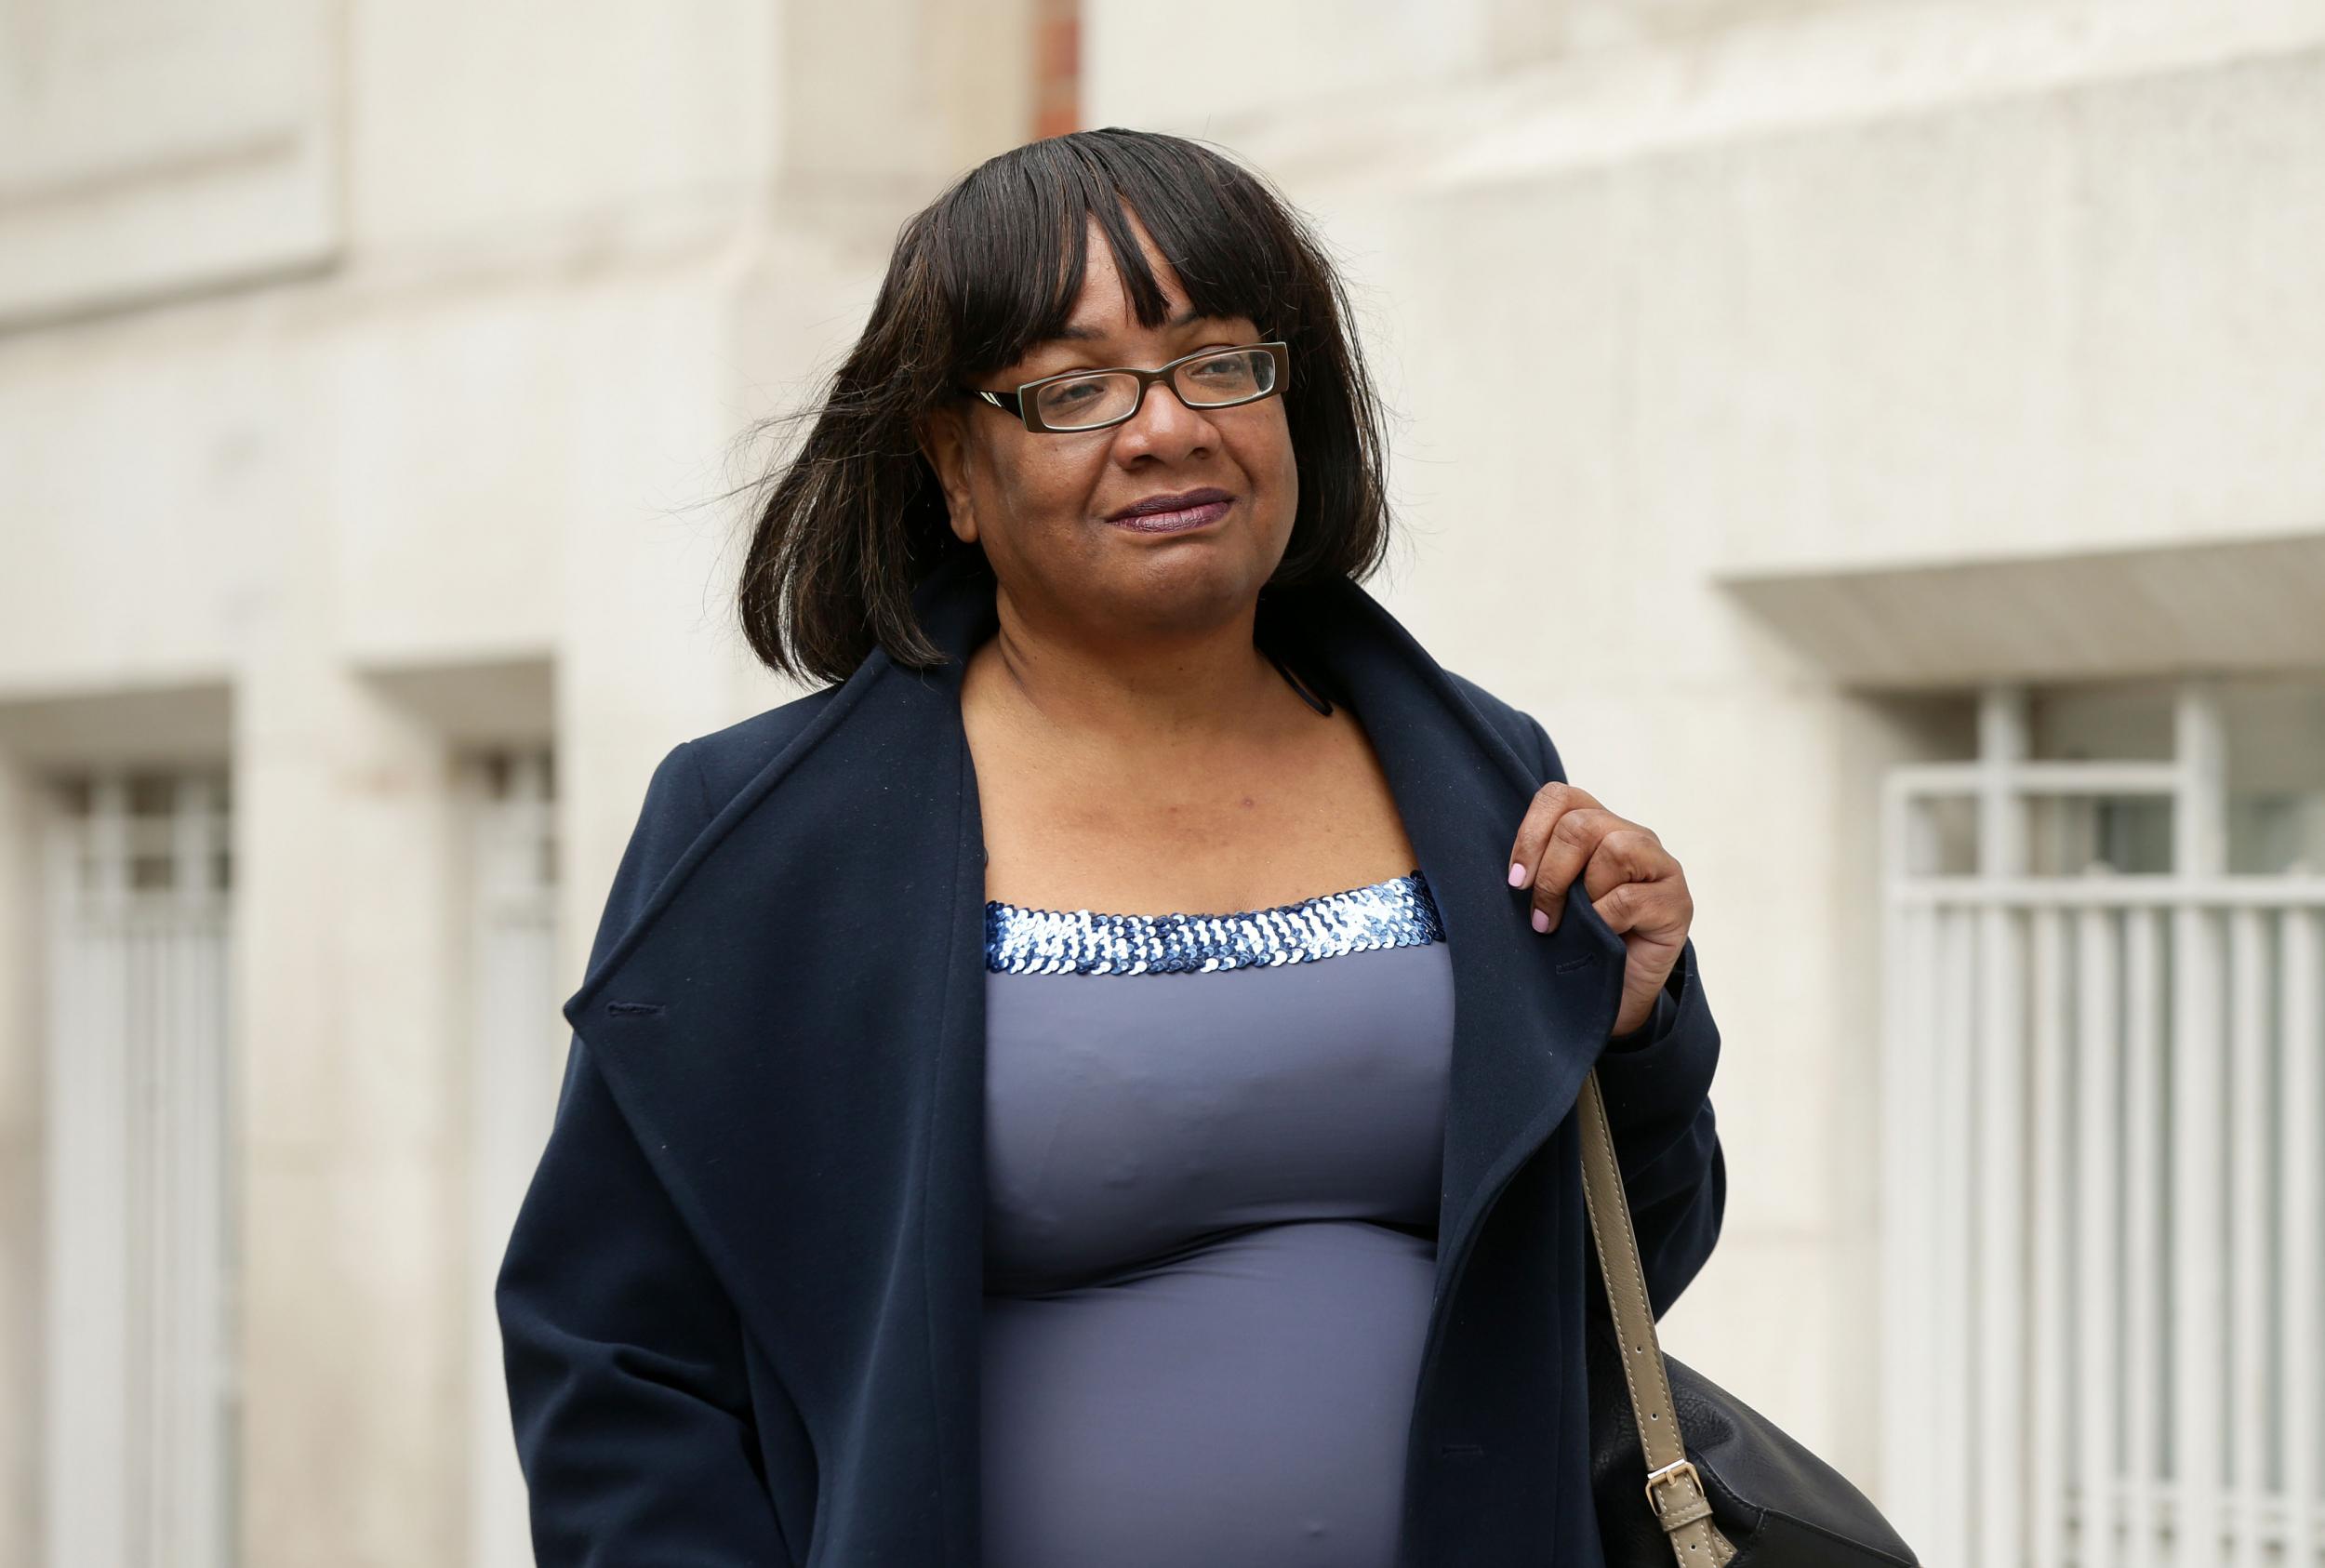 Thumbnail for Diane Abbott suffering from 'serious, long-term condition', Labour shadow cabinet member Barry Gardiner says